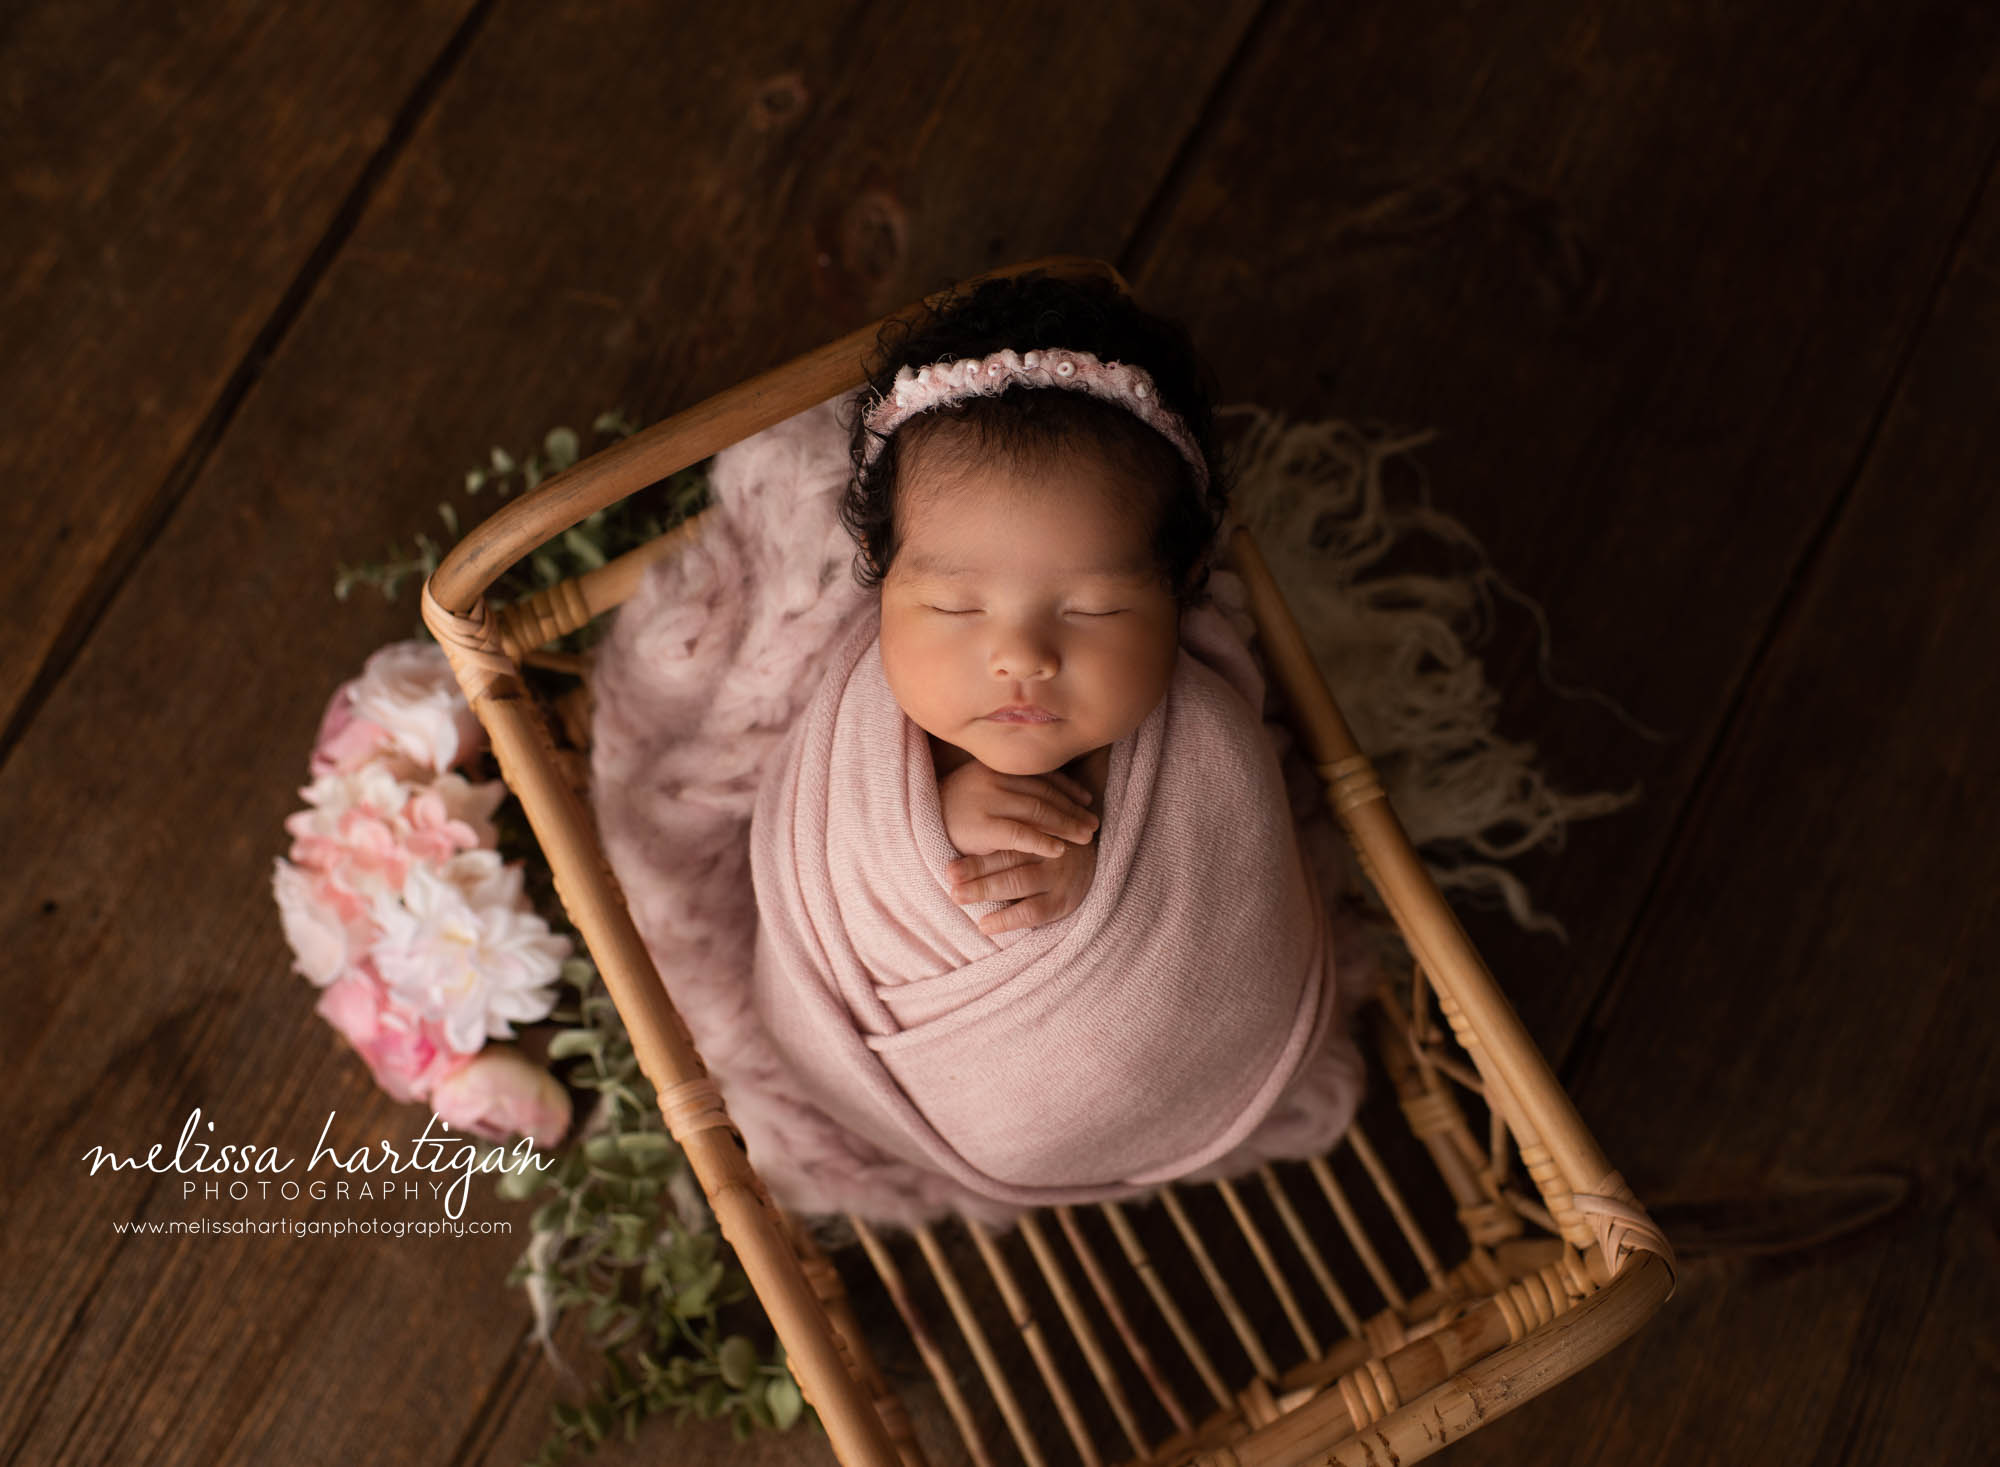 newborn baby girl wrapped in pink wrap posed in wicker basket with pink flowers